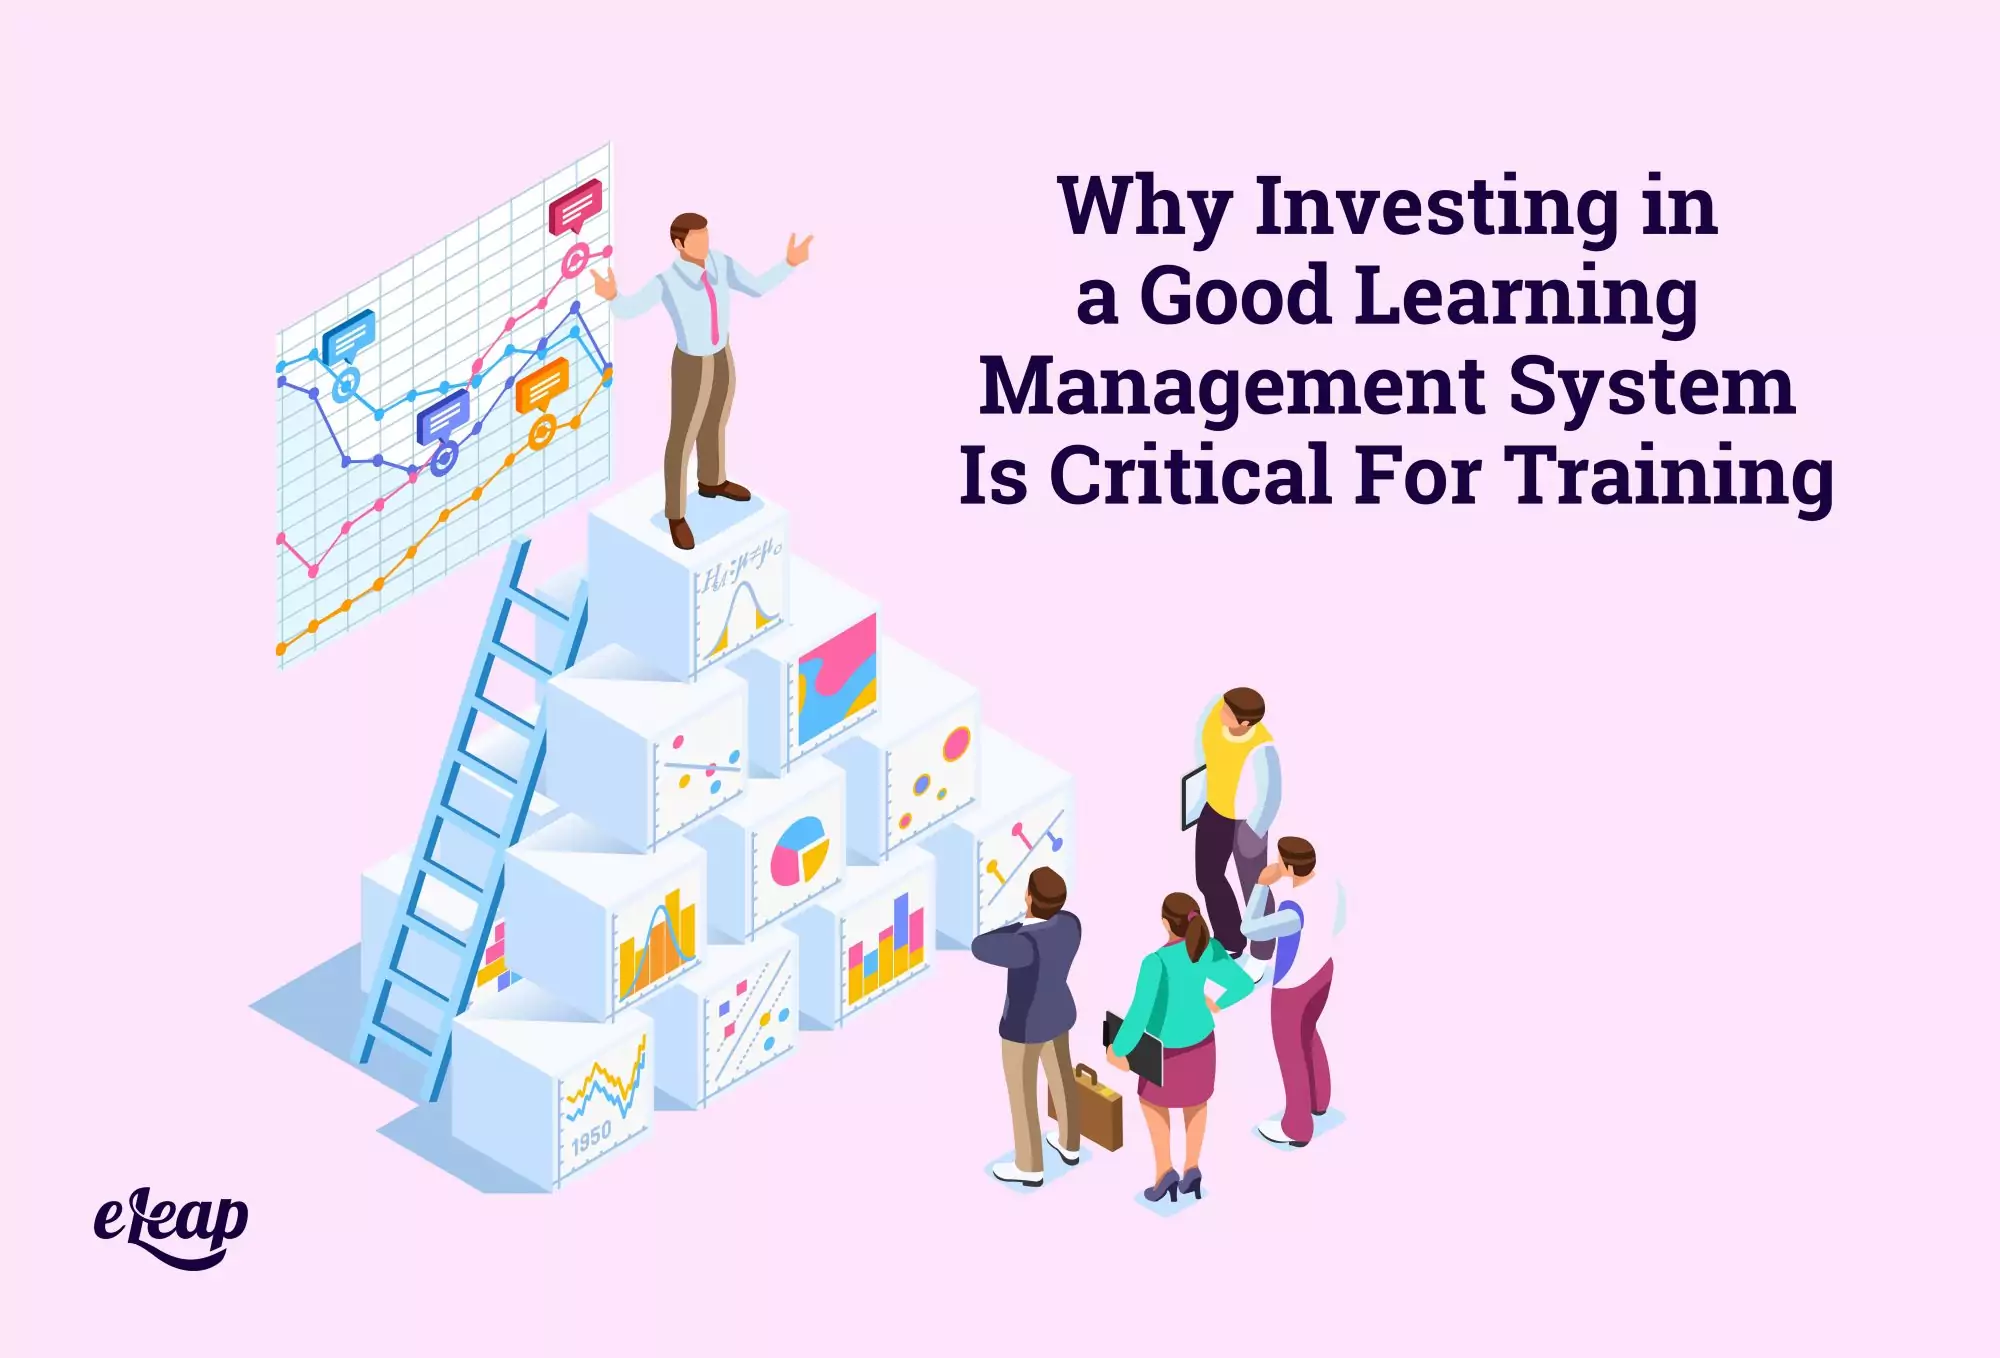 Why Investing in a Good Learning Management System Is Critical For Training